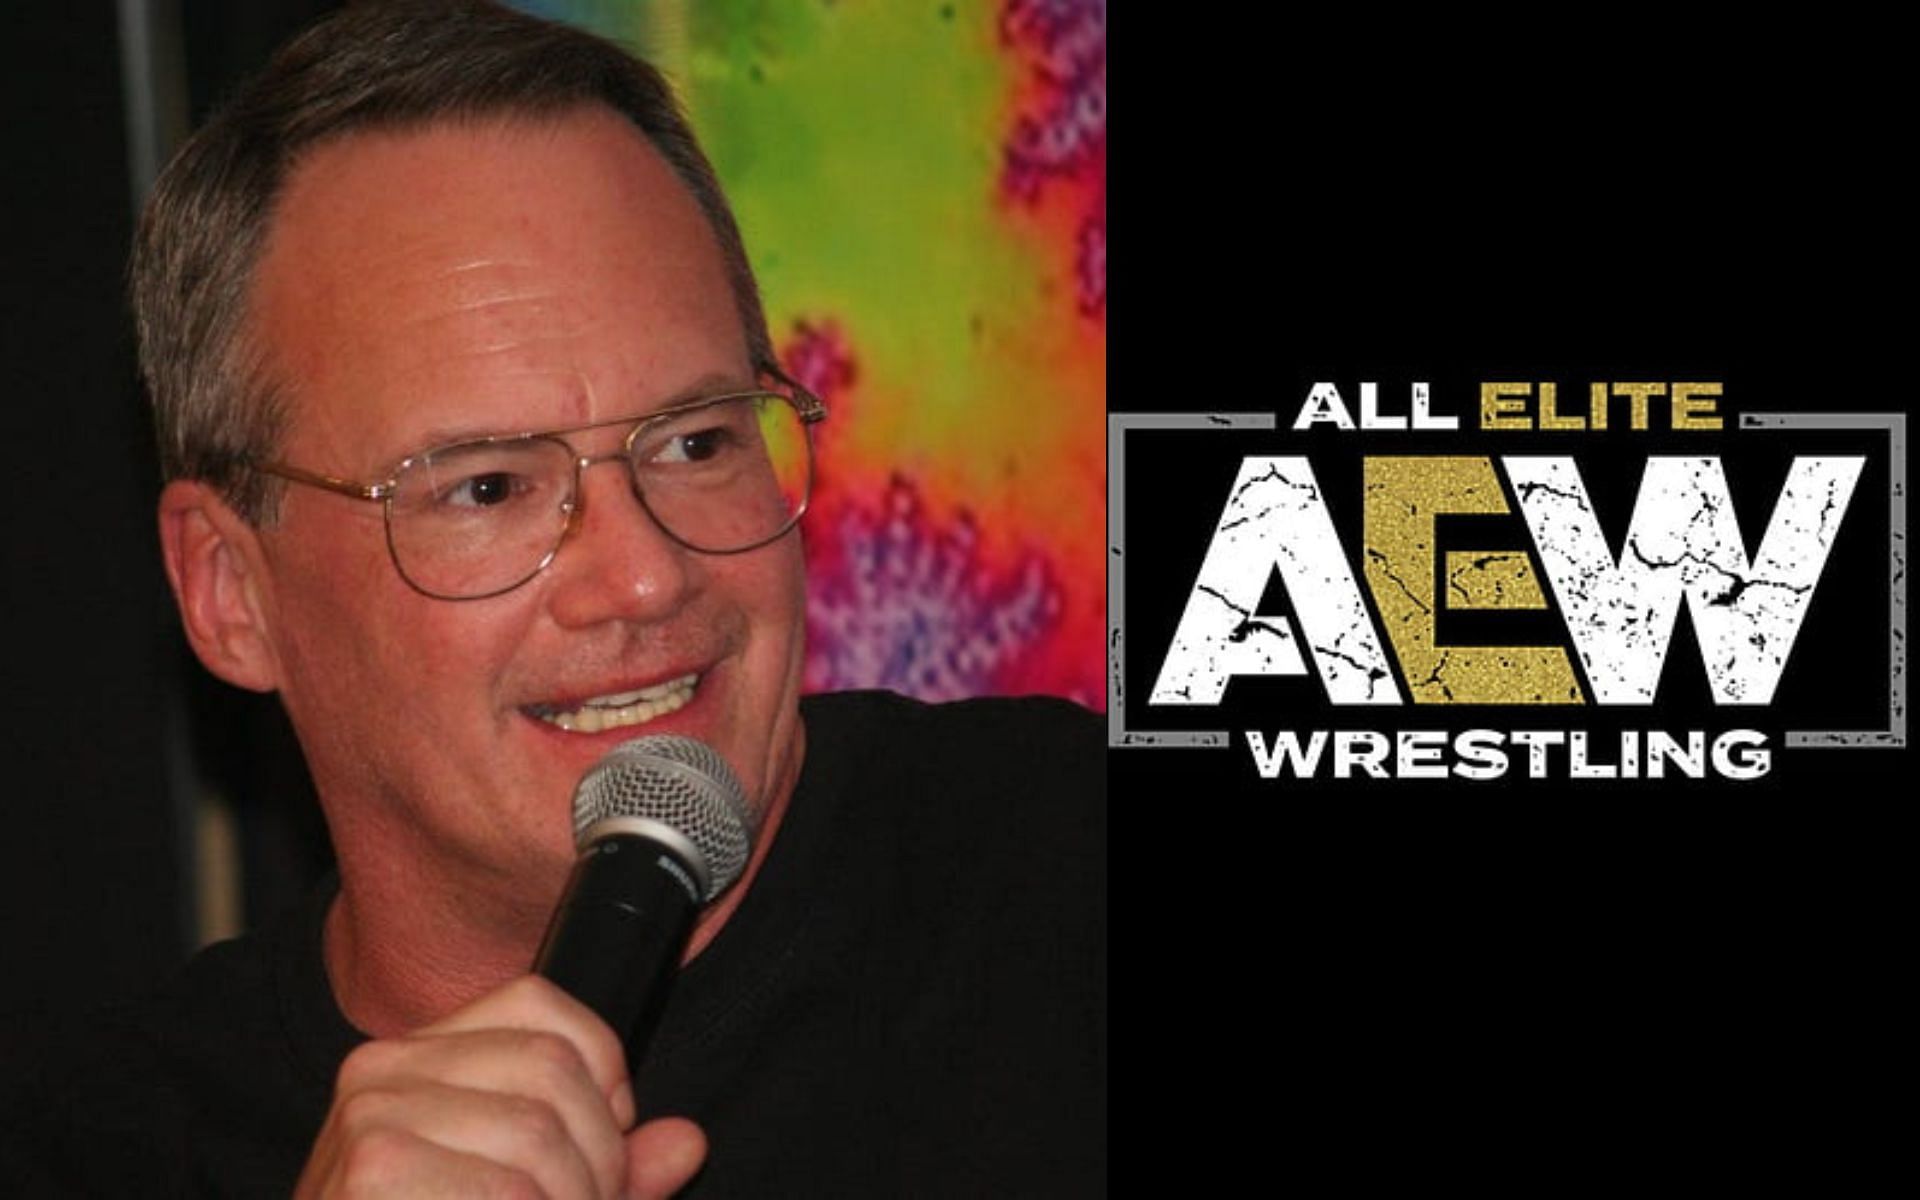 Jim Cornette recently gave comments regarding this latest AEW issue.